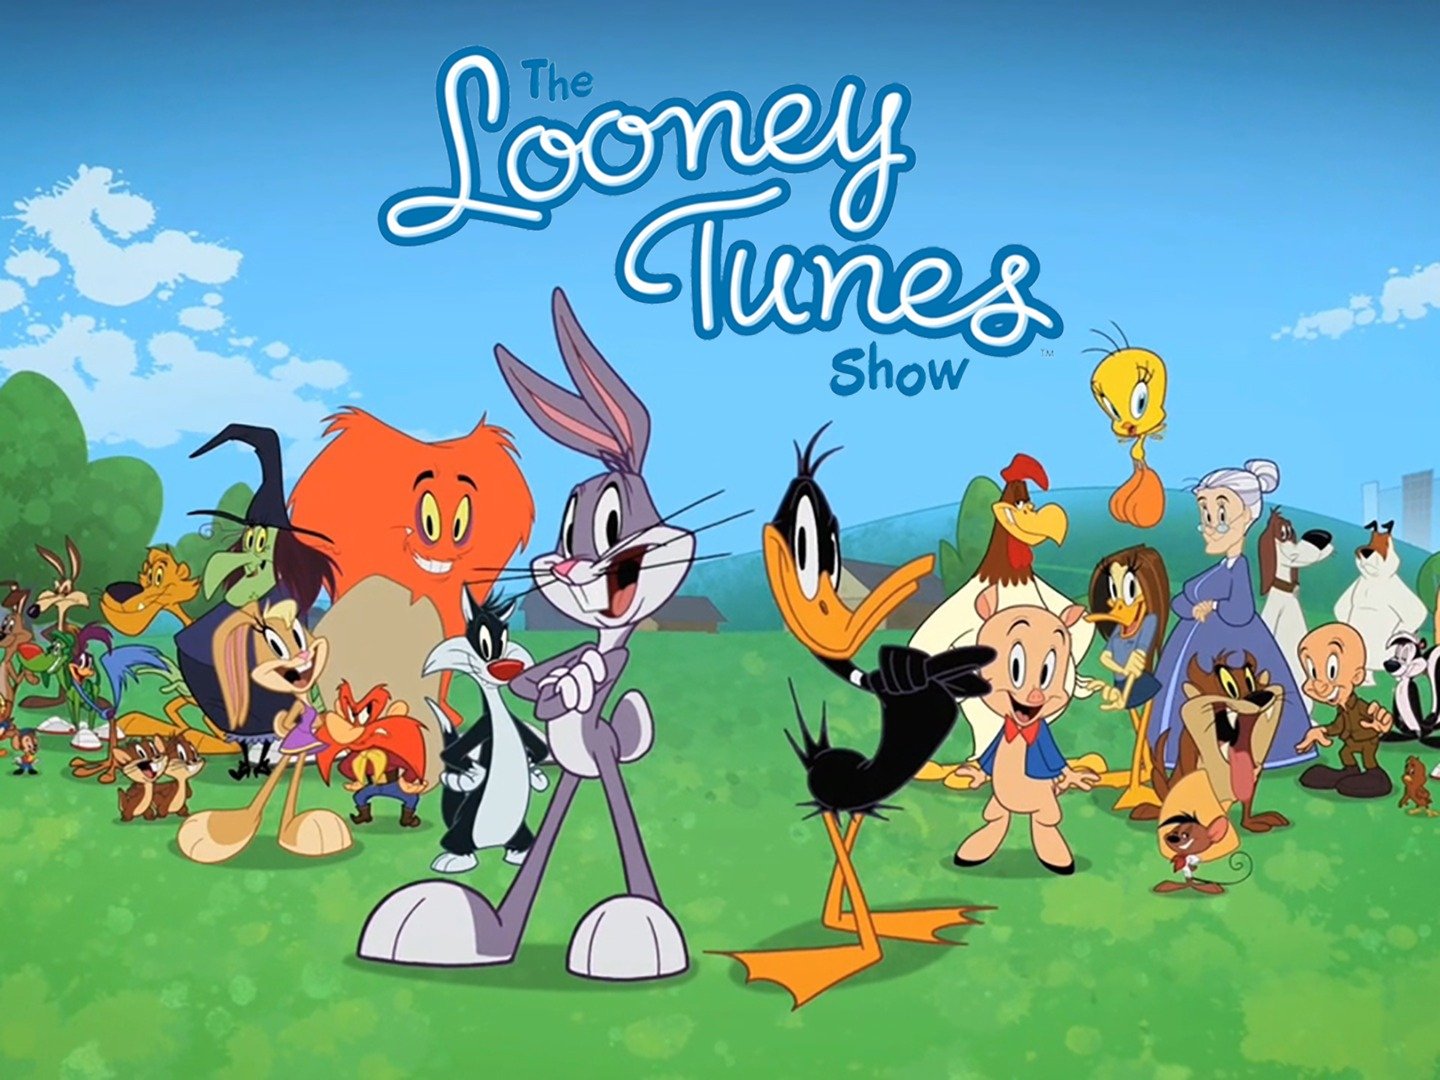 The Looney Tunes Show pic